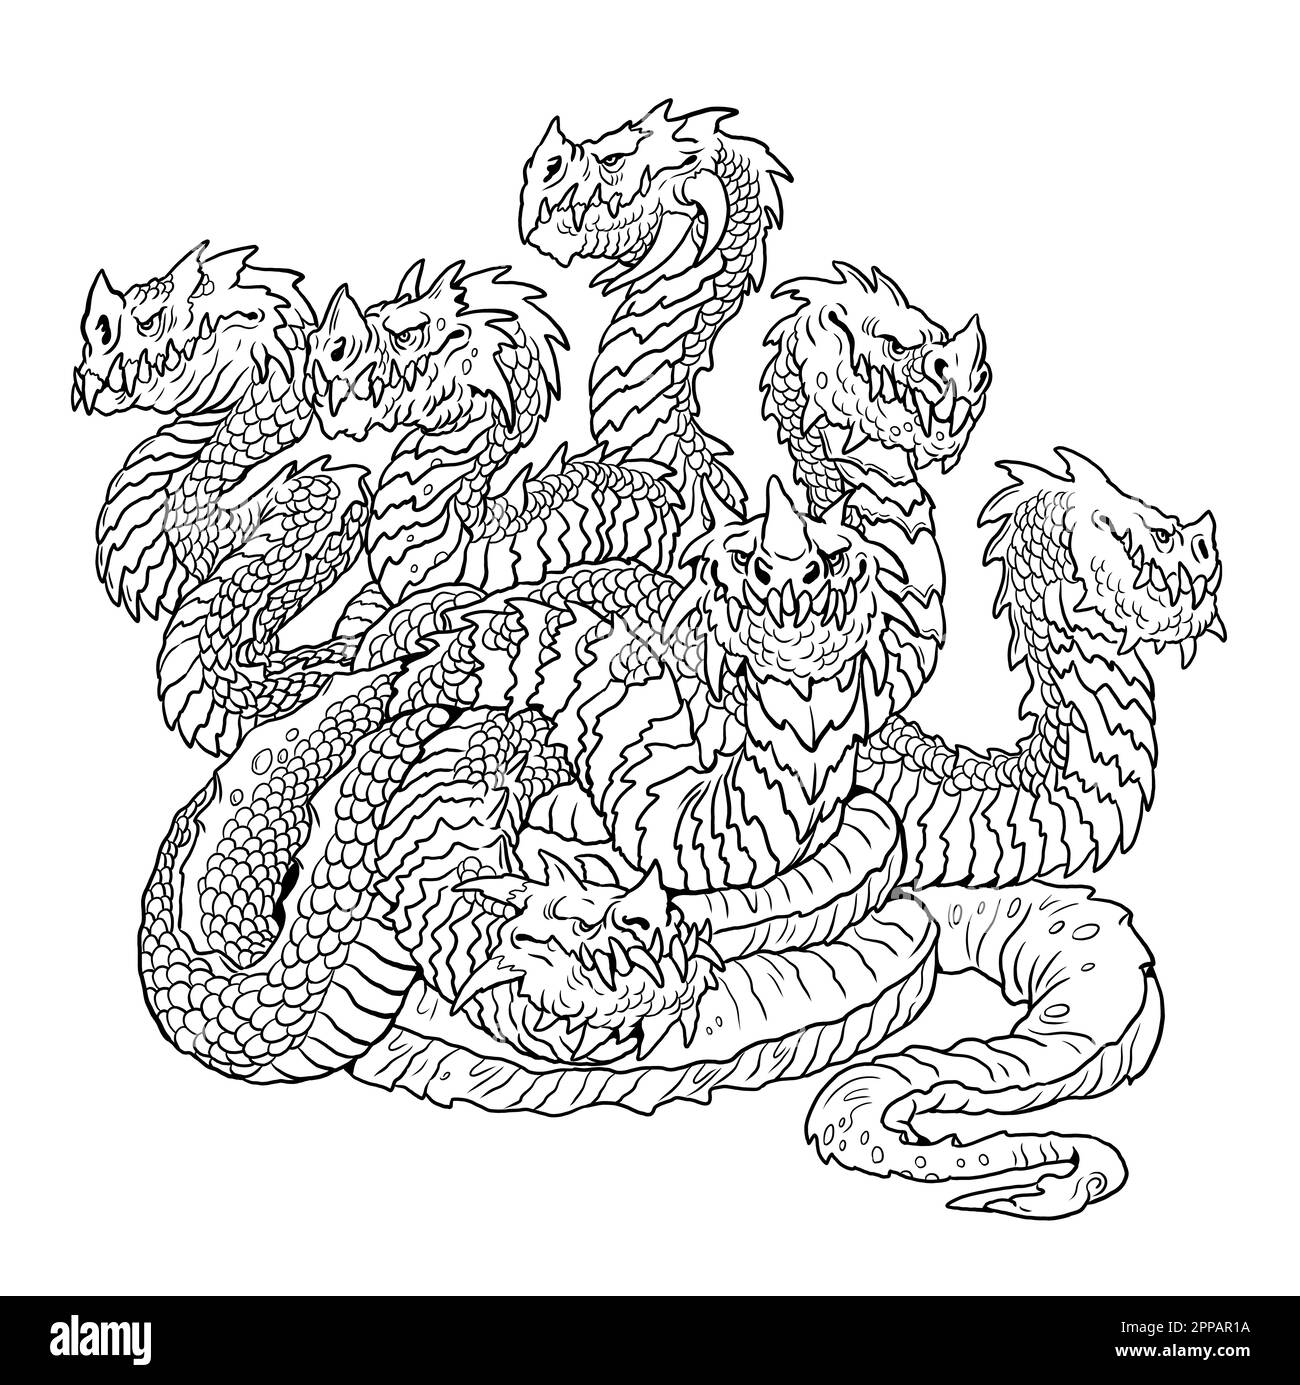 Lernaean Hydra - mythological creature. Multi headed dragon drawing. Fearsome monster. Stock Photo